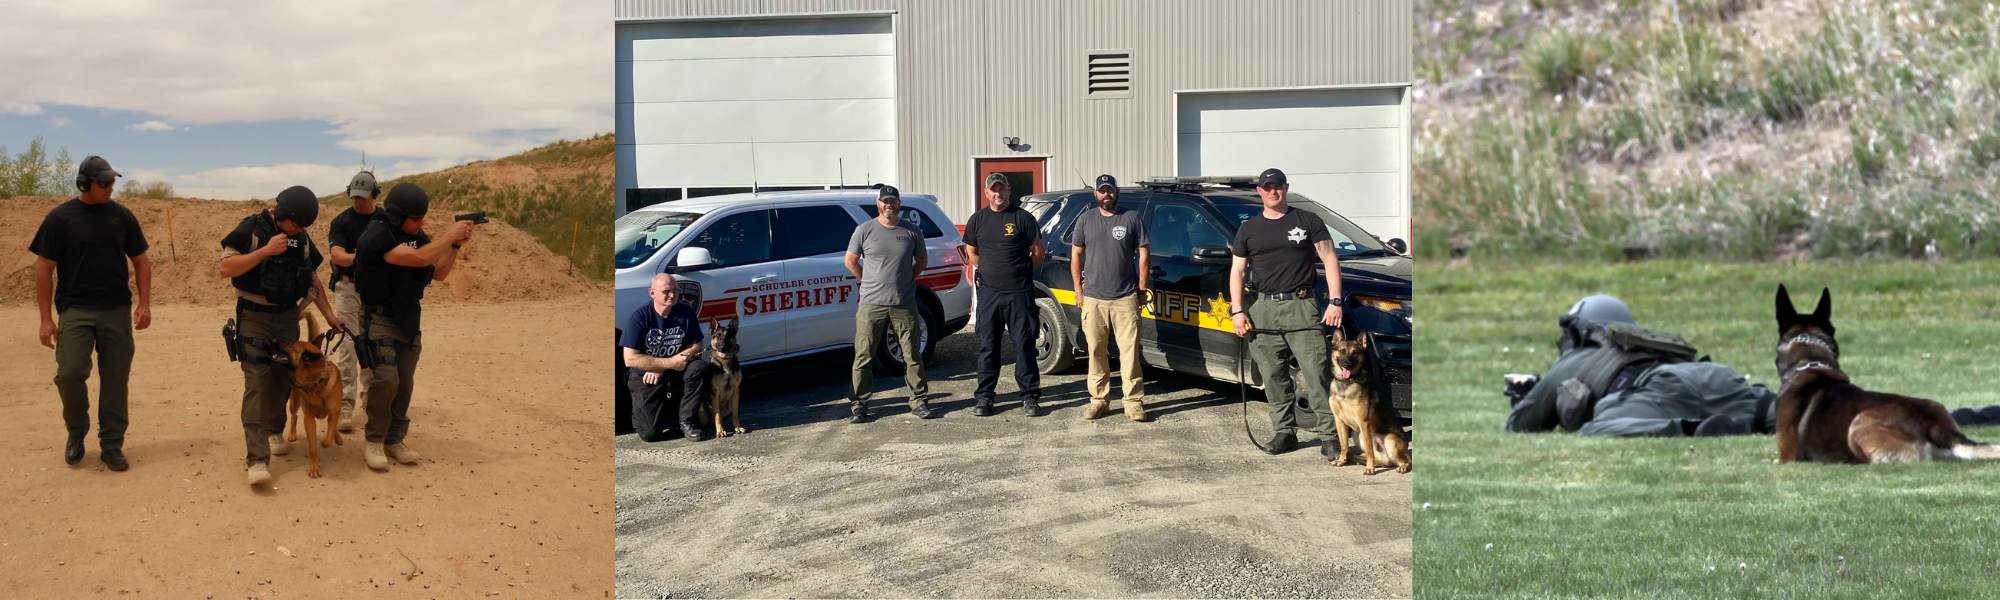 law enforcement TEAMS with police dogs collage